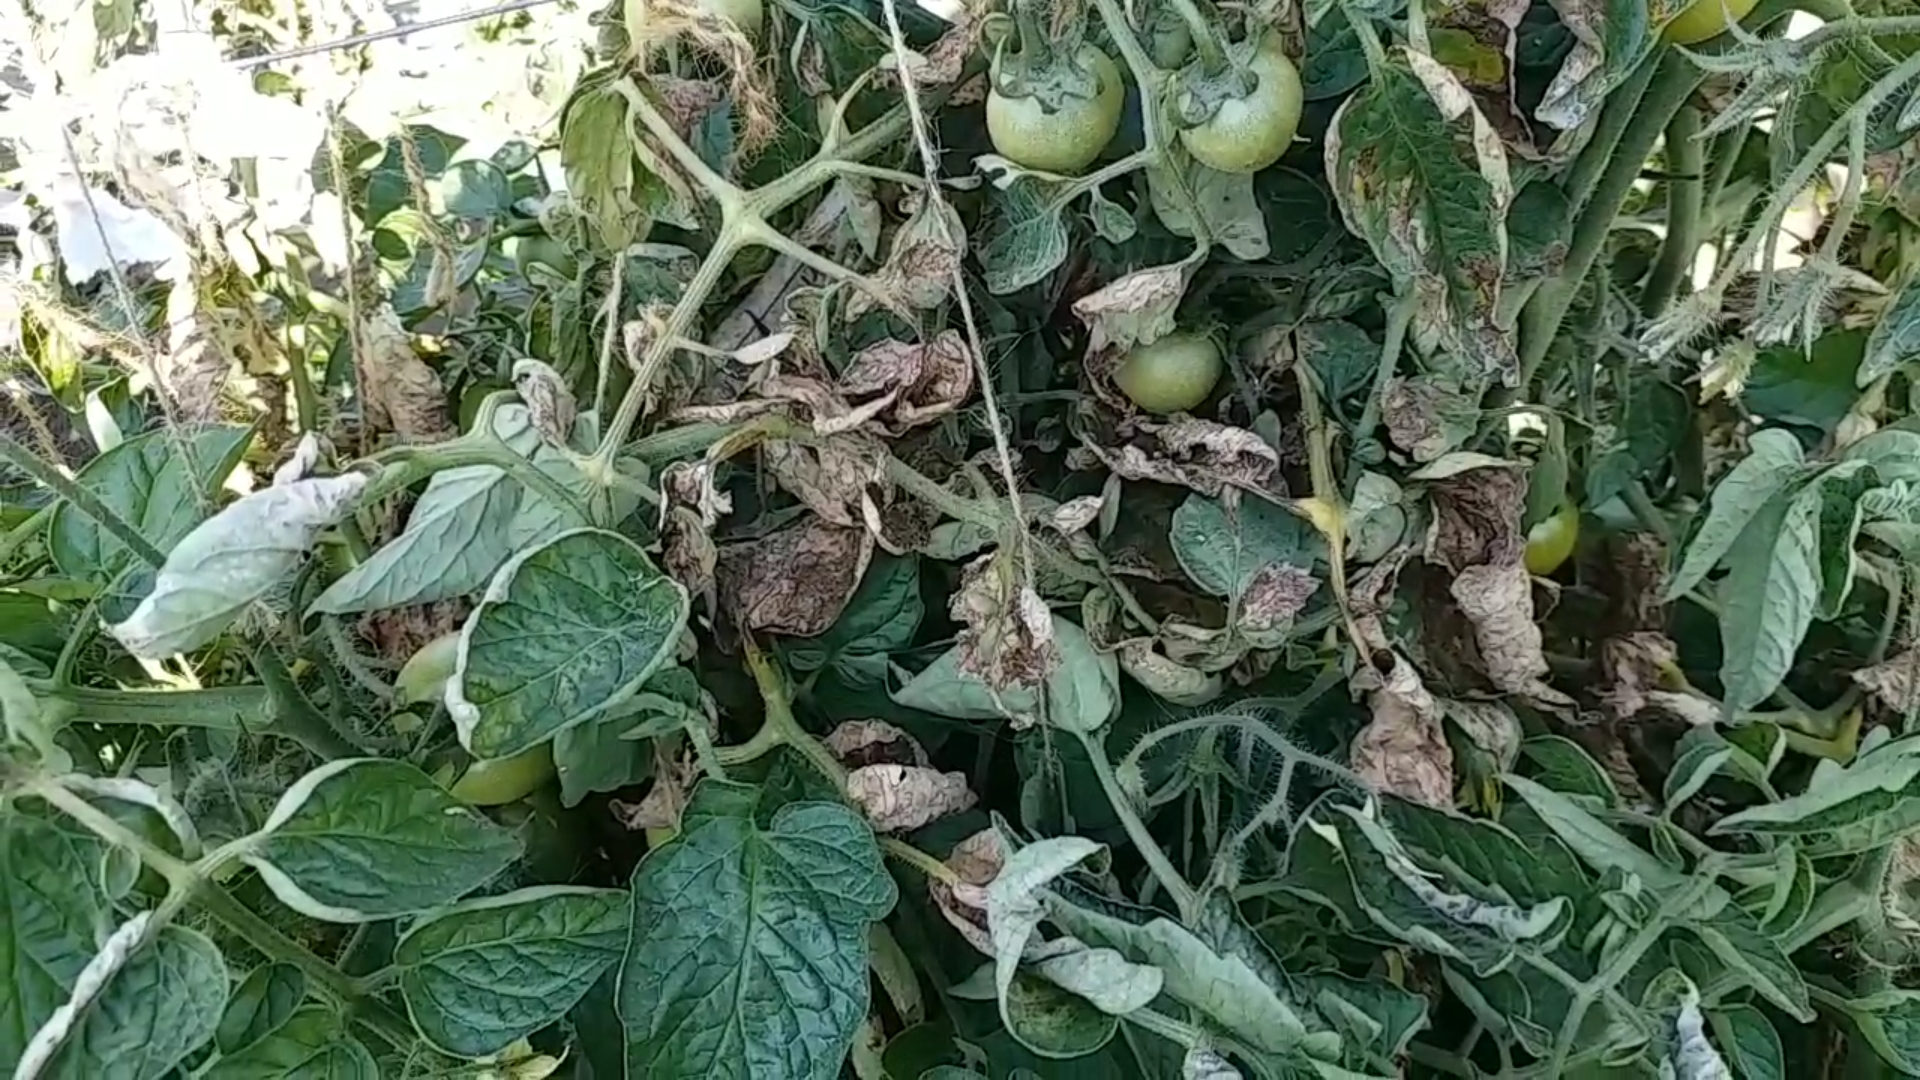 Crop ruined by cold and frost